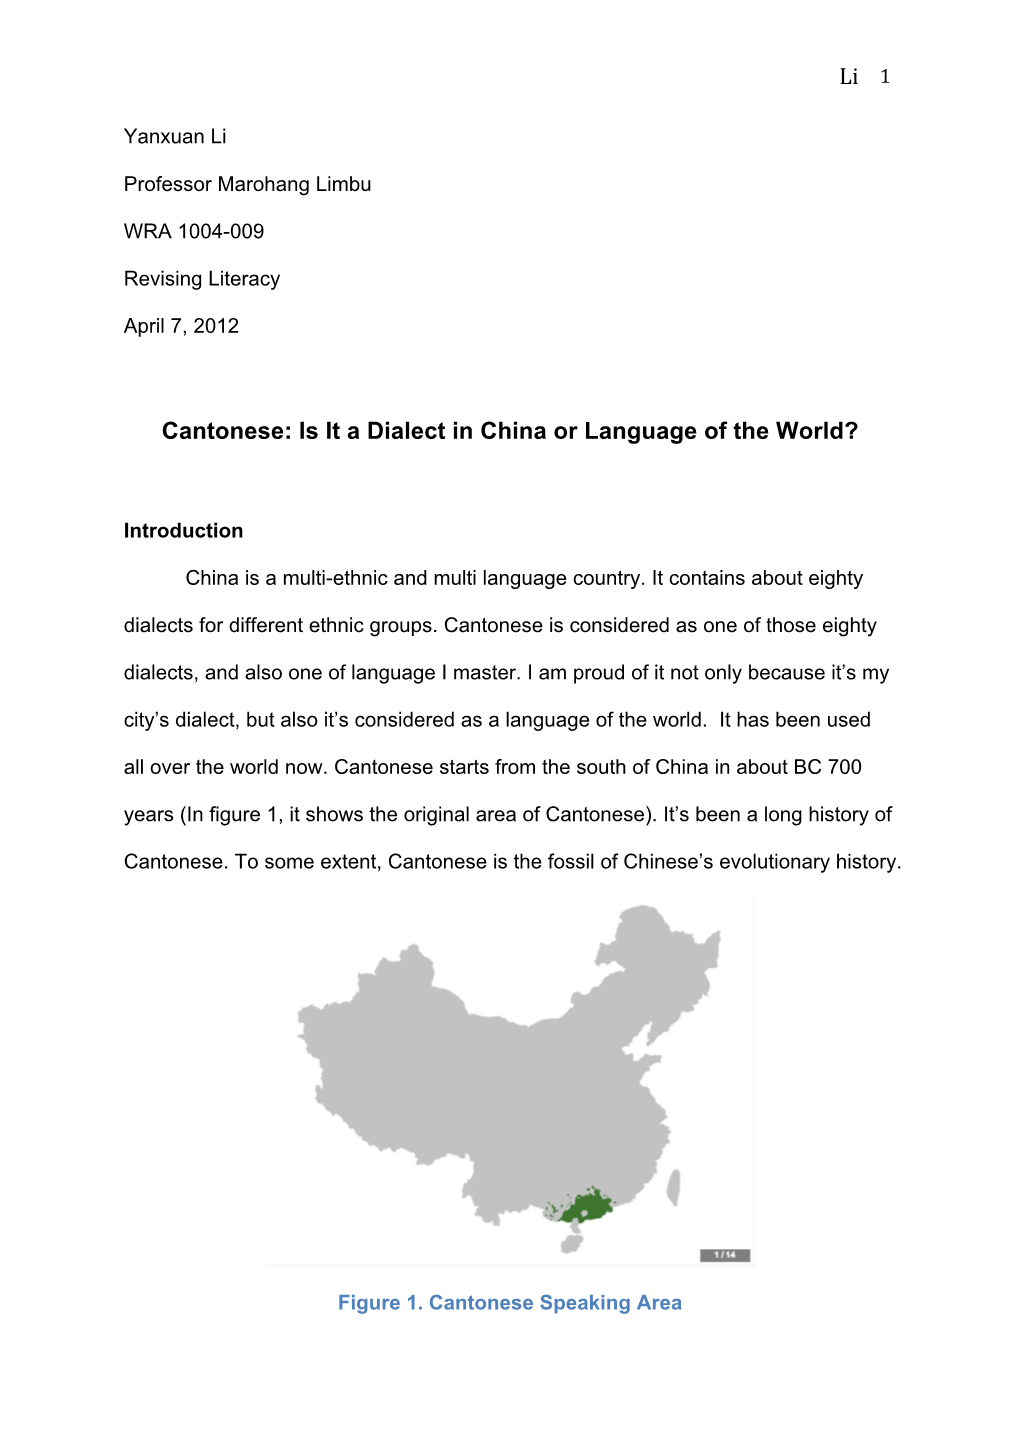 Li 1 Cantonese: Is It a Dialect in China Or Language of the World?